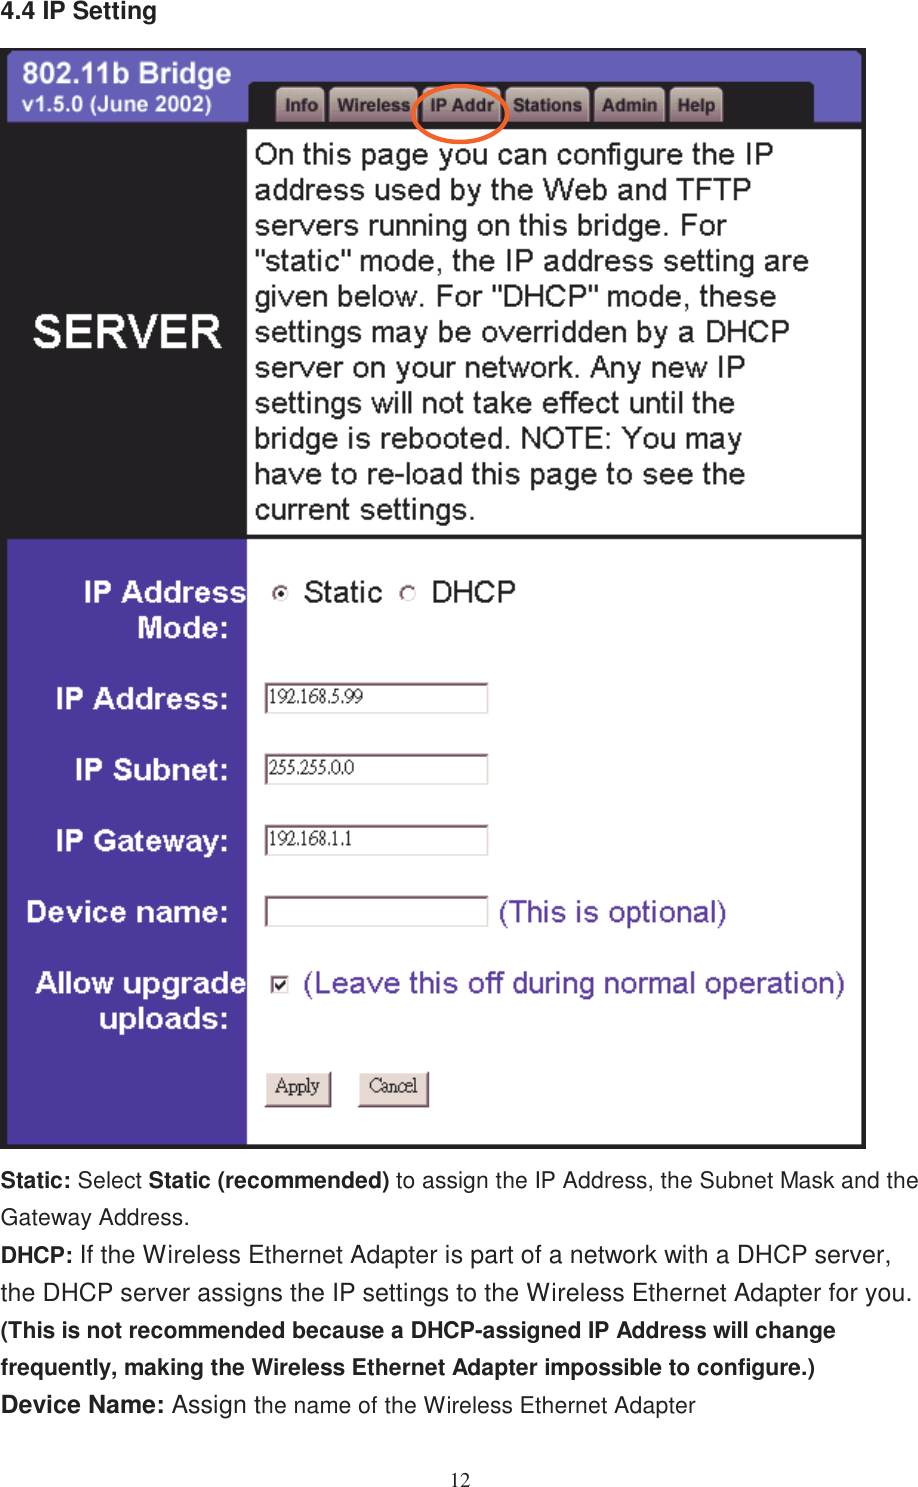 124.4 IP SettingStatic: Select Static (recommended) to assign the IP Address, the Subnet Mask and theGateway Address.DHCP: If the Wireless Ethernet Adapter is part of a network with a DHCP server,the DHCP server assigns the IP settings to the Wireless Ethernet Adapter for you.(This is not recommended because a DHCP-assigned IP Address will changefrequently, making the Wireless Ethernet Adapter impossible to configure.)Device Name: Assign the name of the Wireless Ethernet Adapter